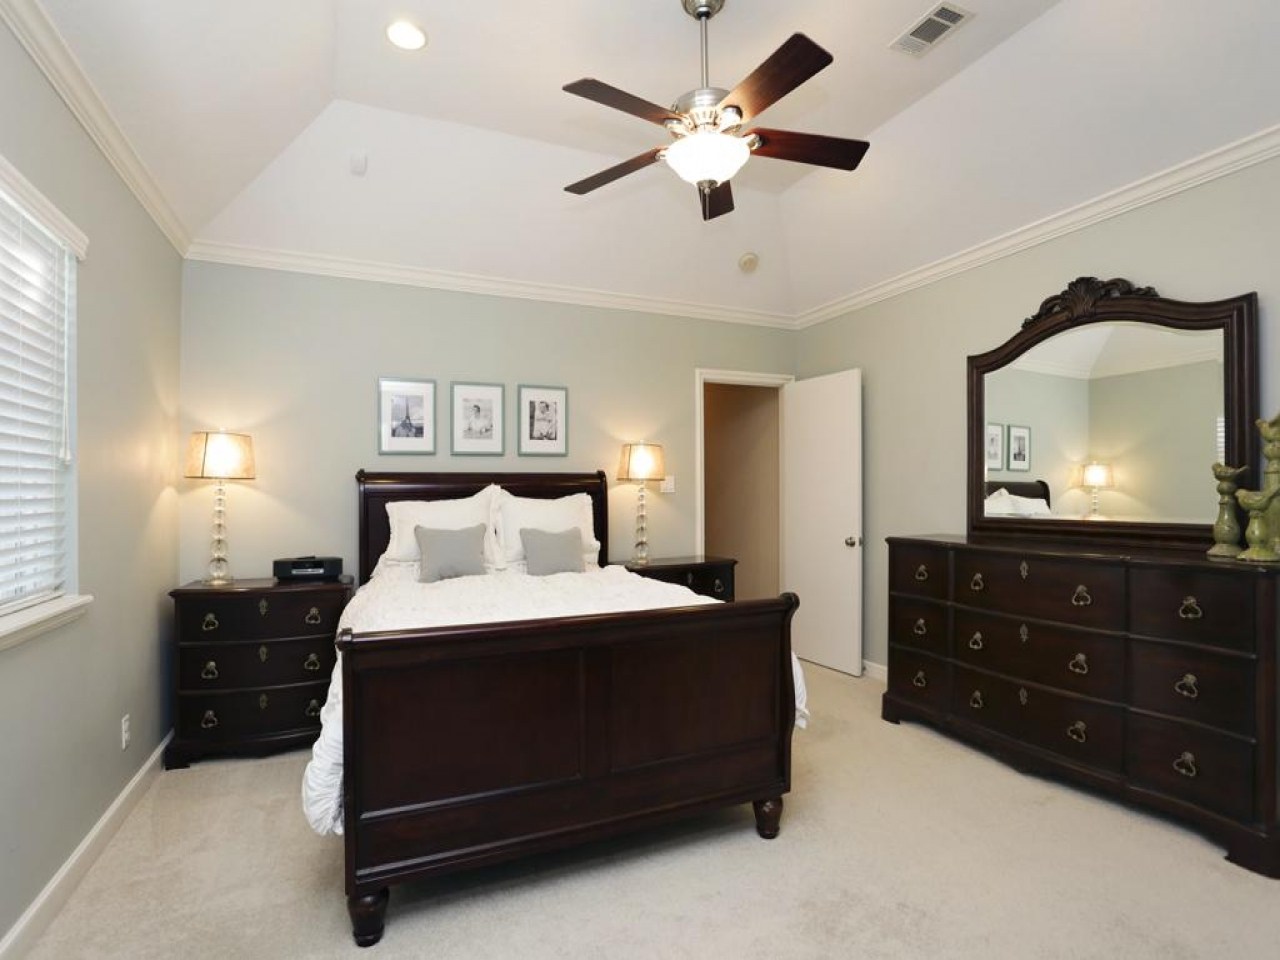 Master bedroom ceiling fans - 25 methods to save your money | Warisan